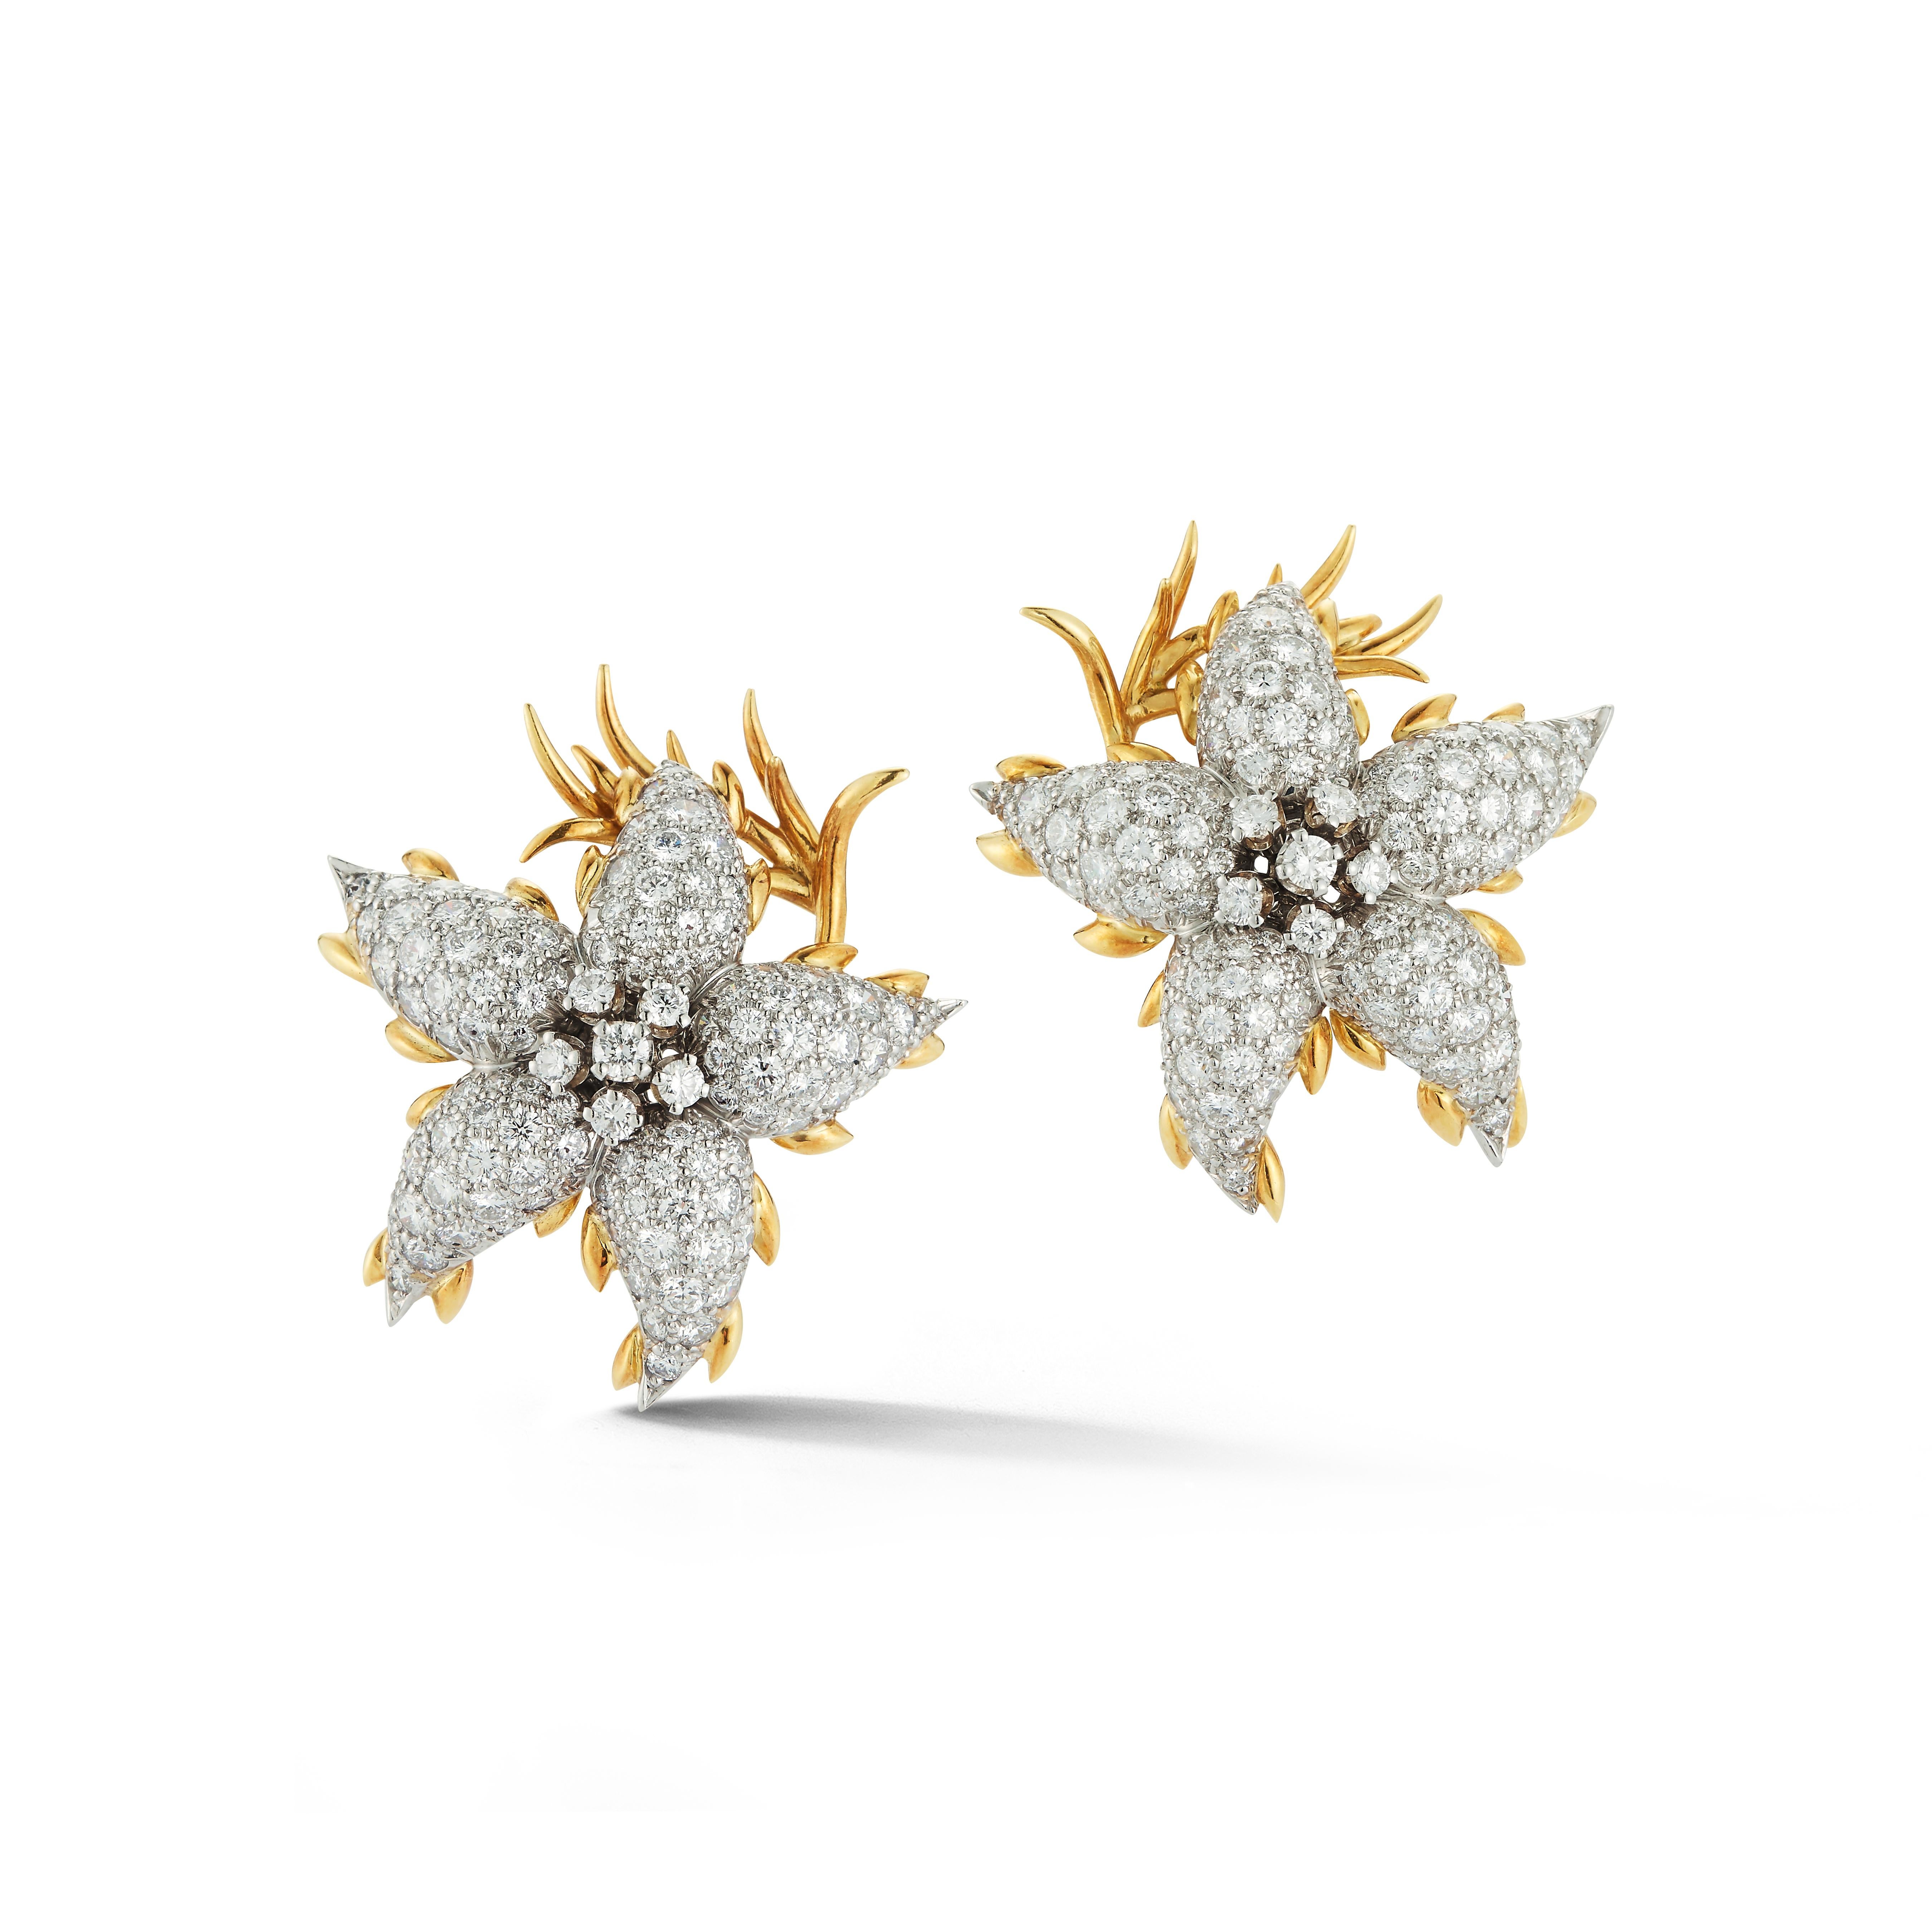 Large Size Diamond Floral Earrings made by Jean Schlumberger for Tiffany and Co
Back Type: Clip On
Measurements: 1.25